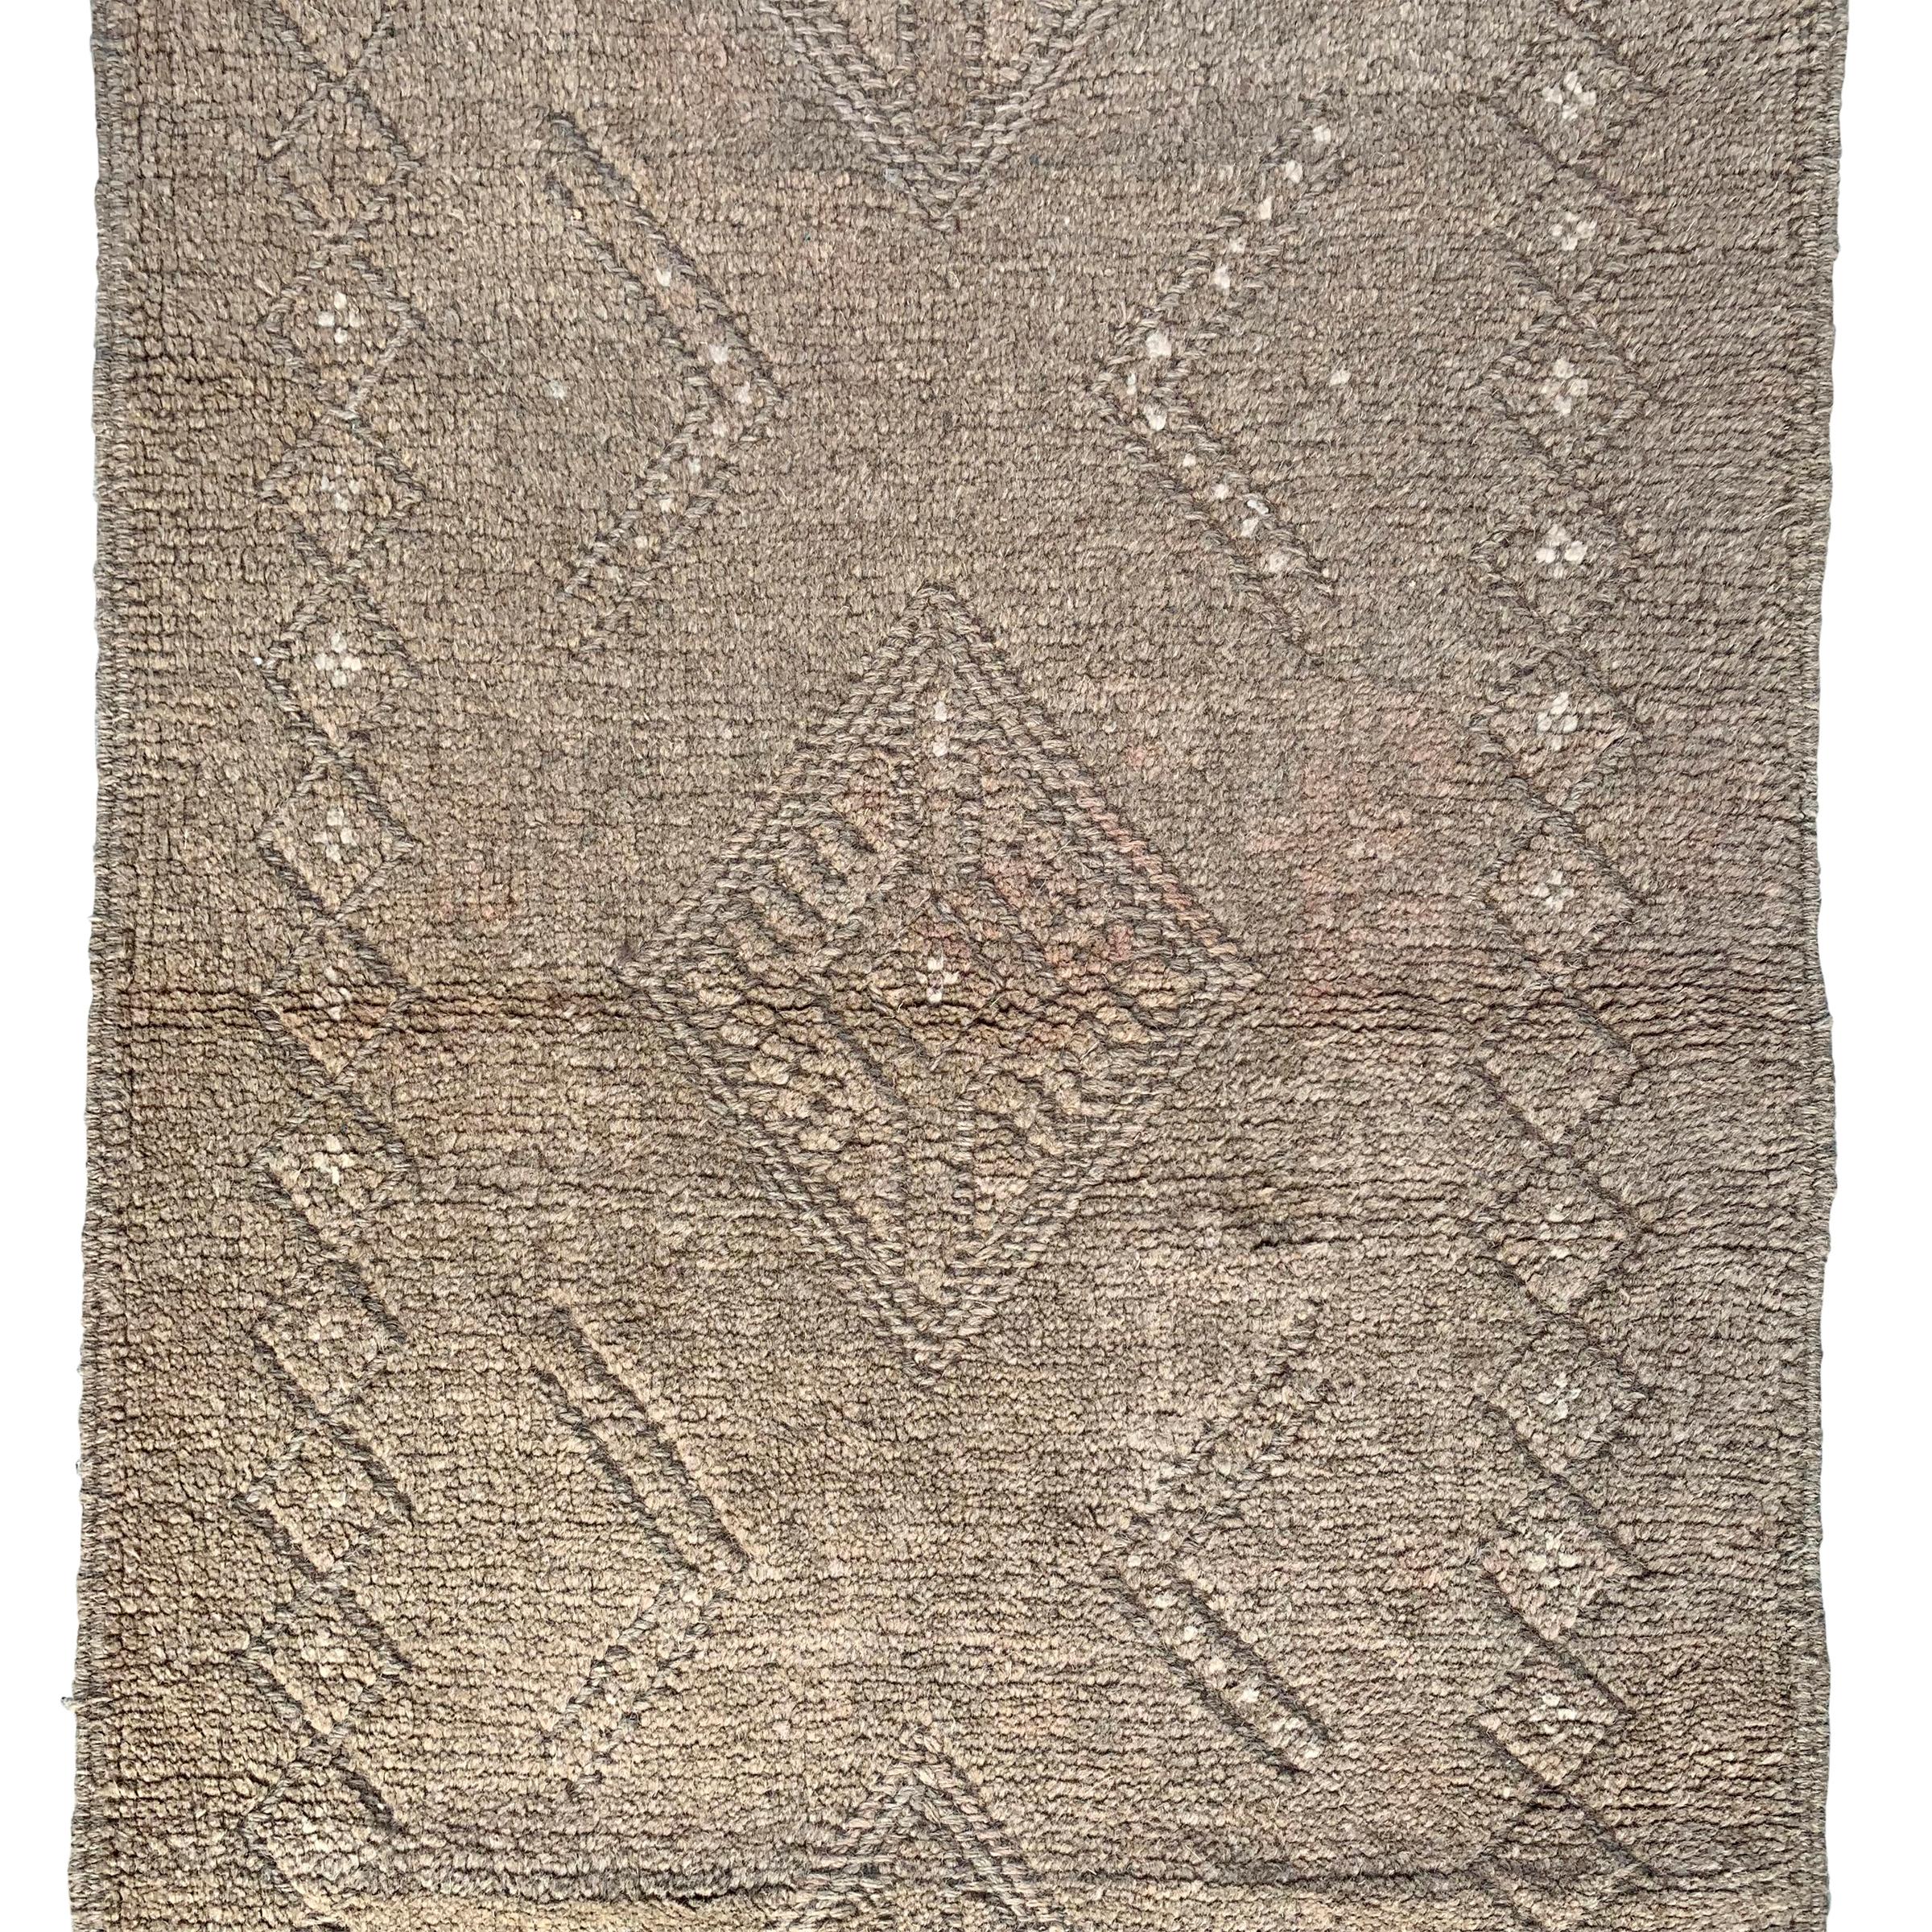 A wonderful vintage late 20th century Persian Gabbeh runner with a beautiful tone on tone woven pattern containing multiple diamonds running the length of the rug.